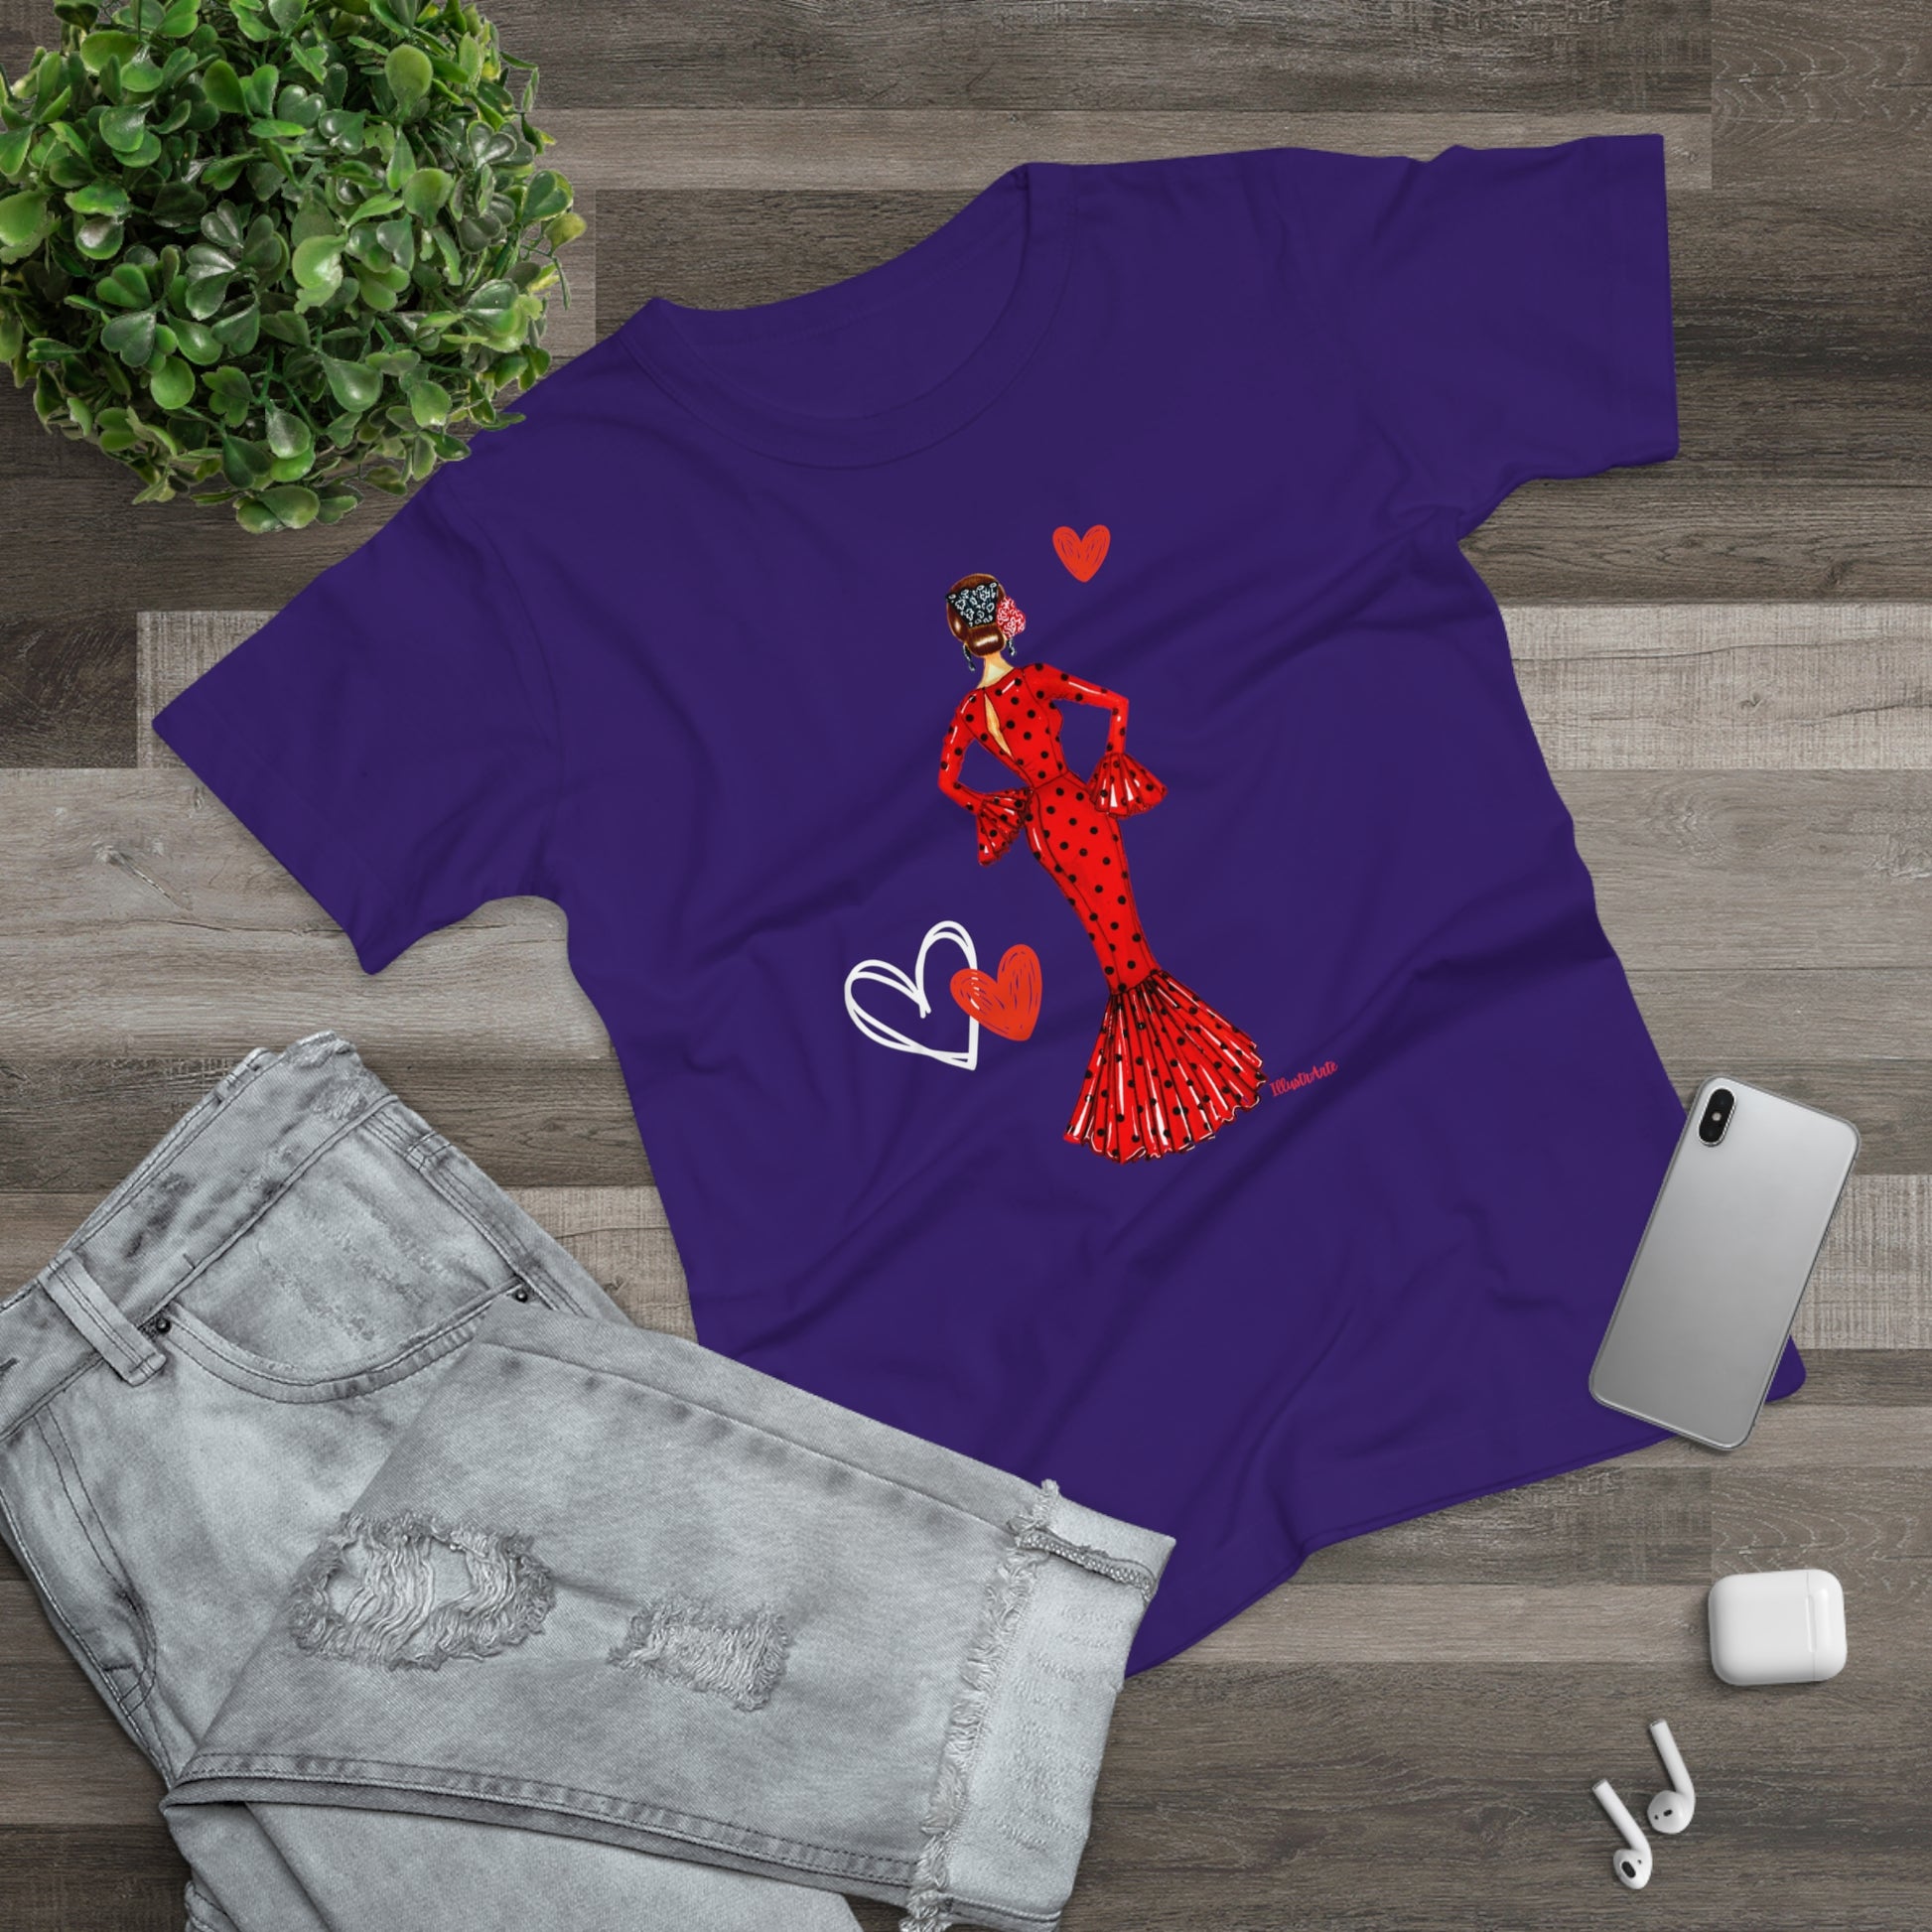 a purple t - shirt with a picture of a woman in a red dress